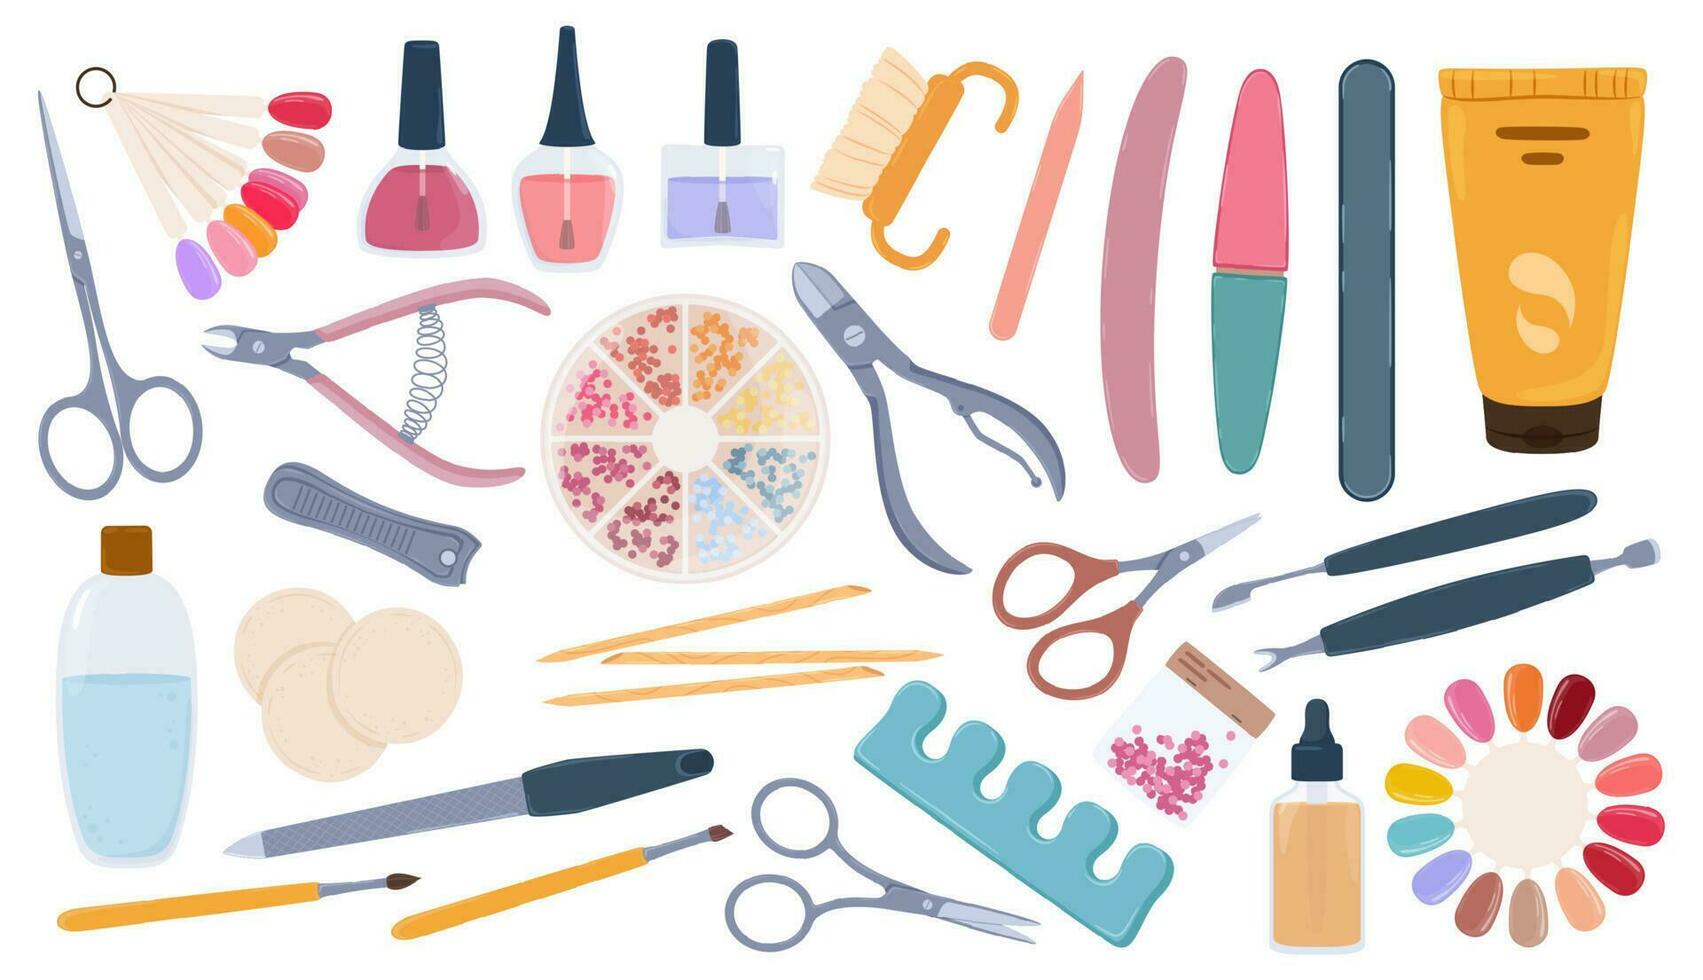 Manicure and pedicure tools or accessories, nail salon supplies. Hand cream, polish samples, files, scissors, nails care elements vector set